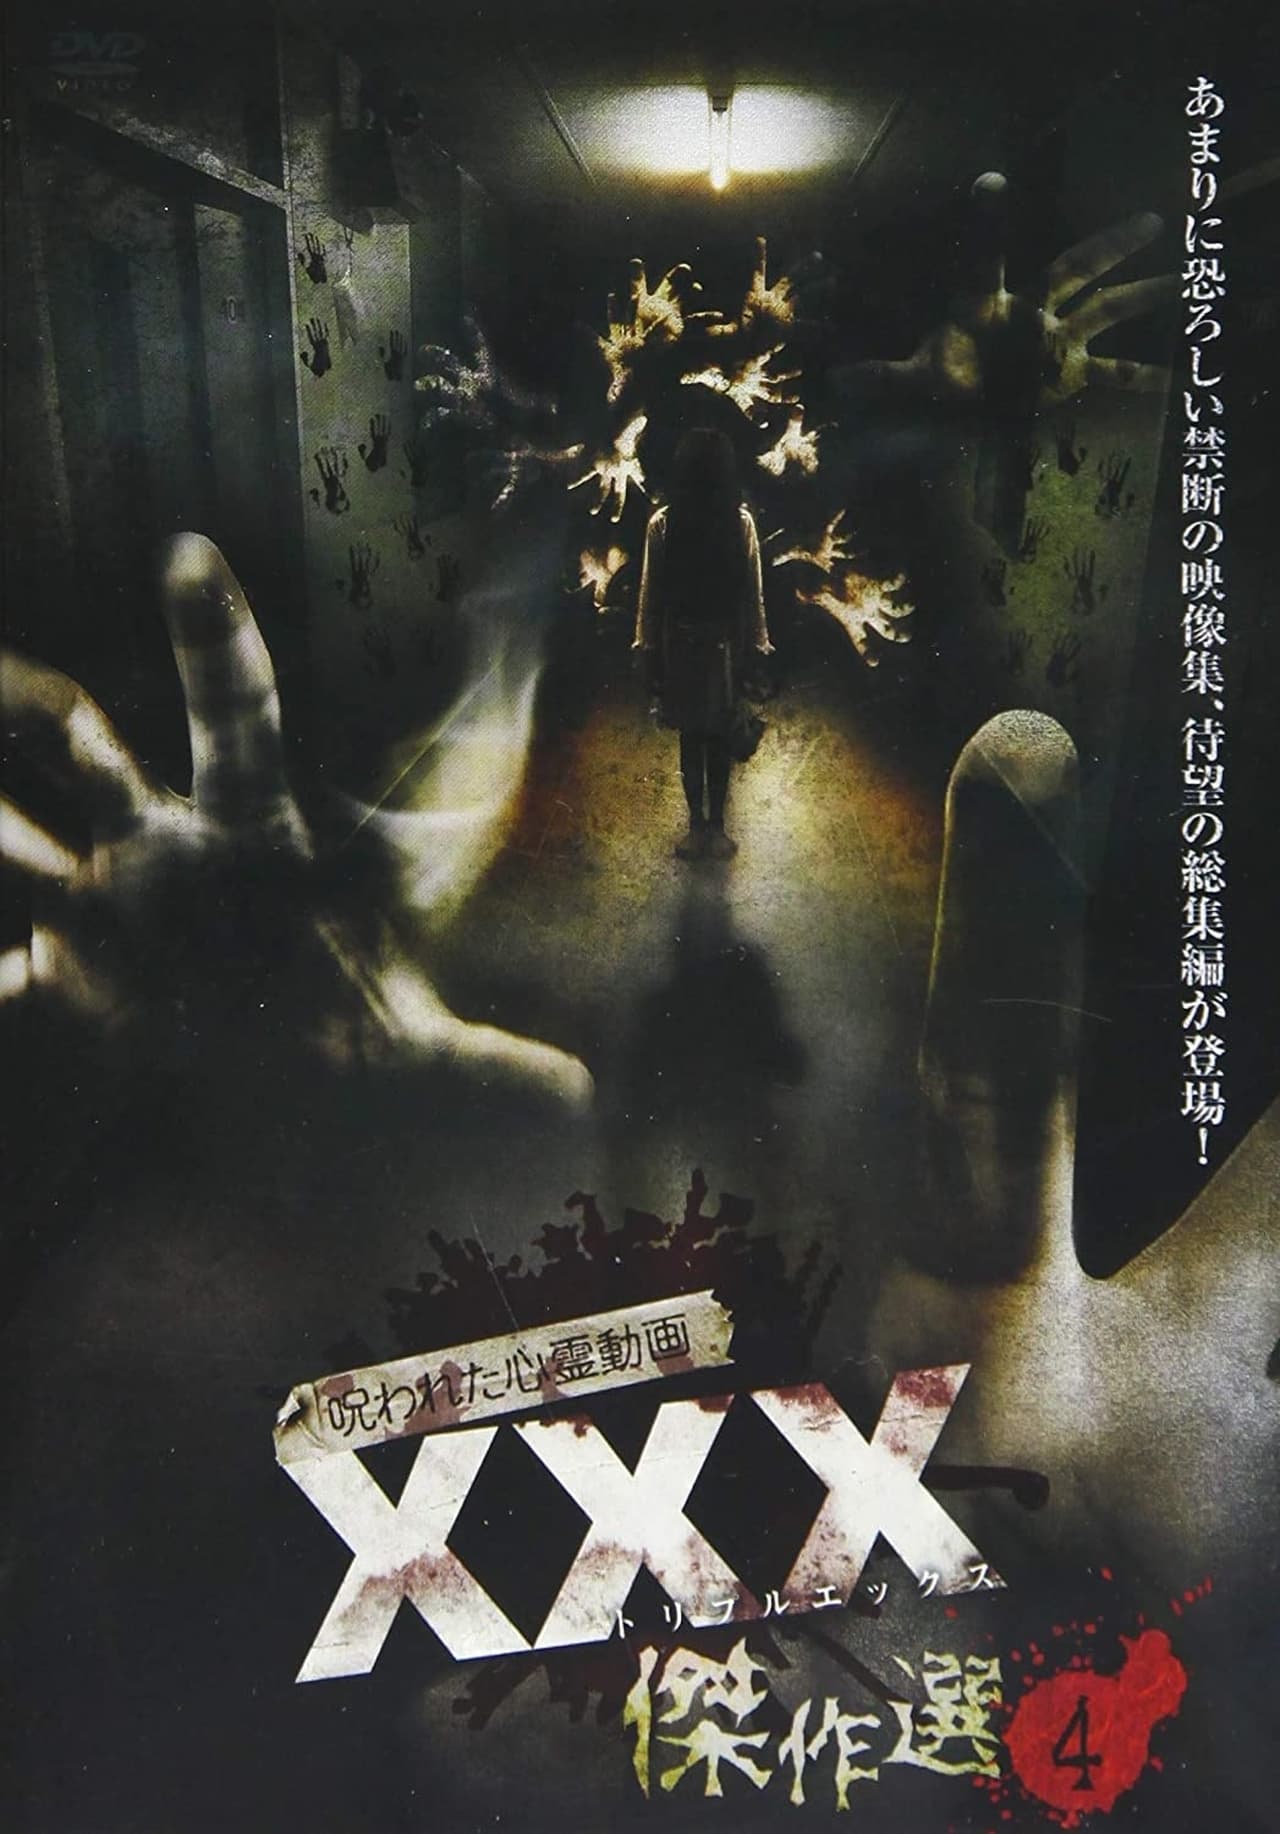 Cursed Psychic Video XXX (Triple X) Masterpiece Selection 4